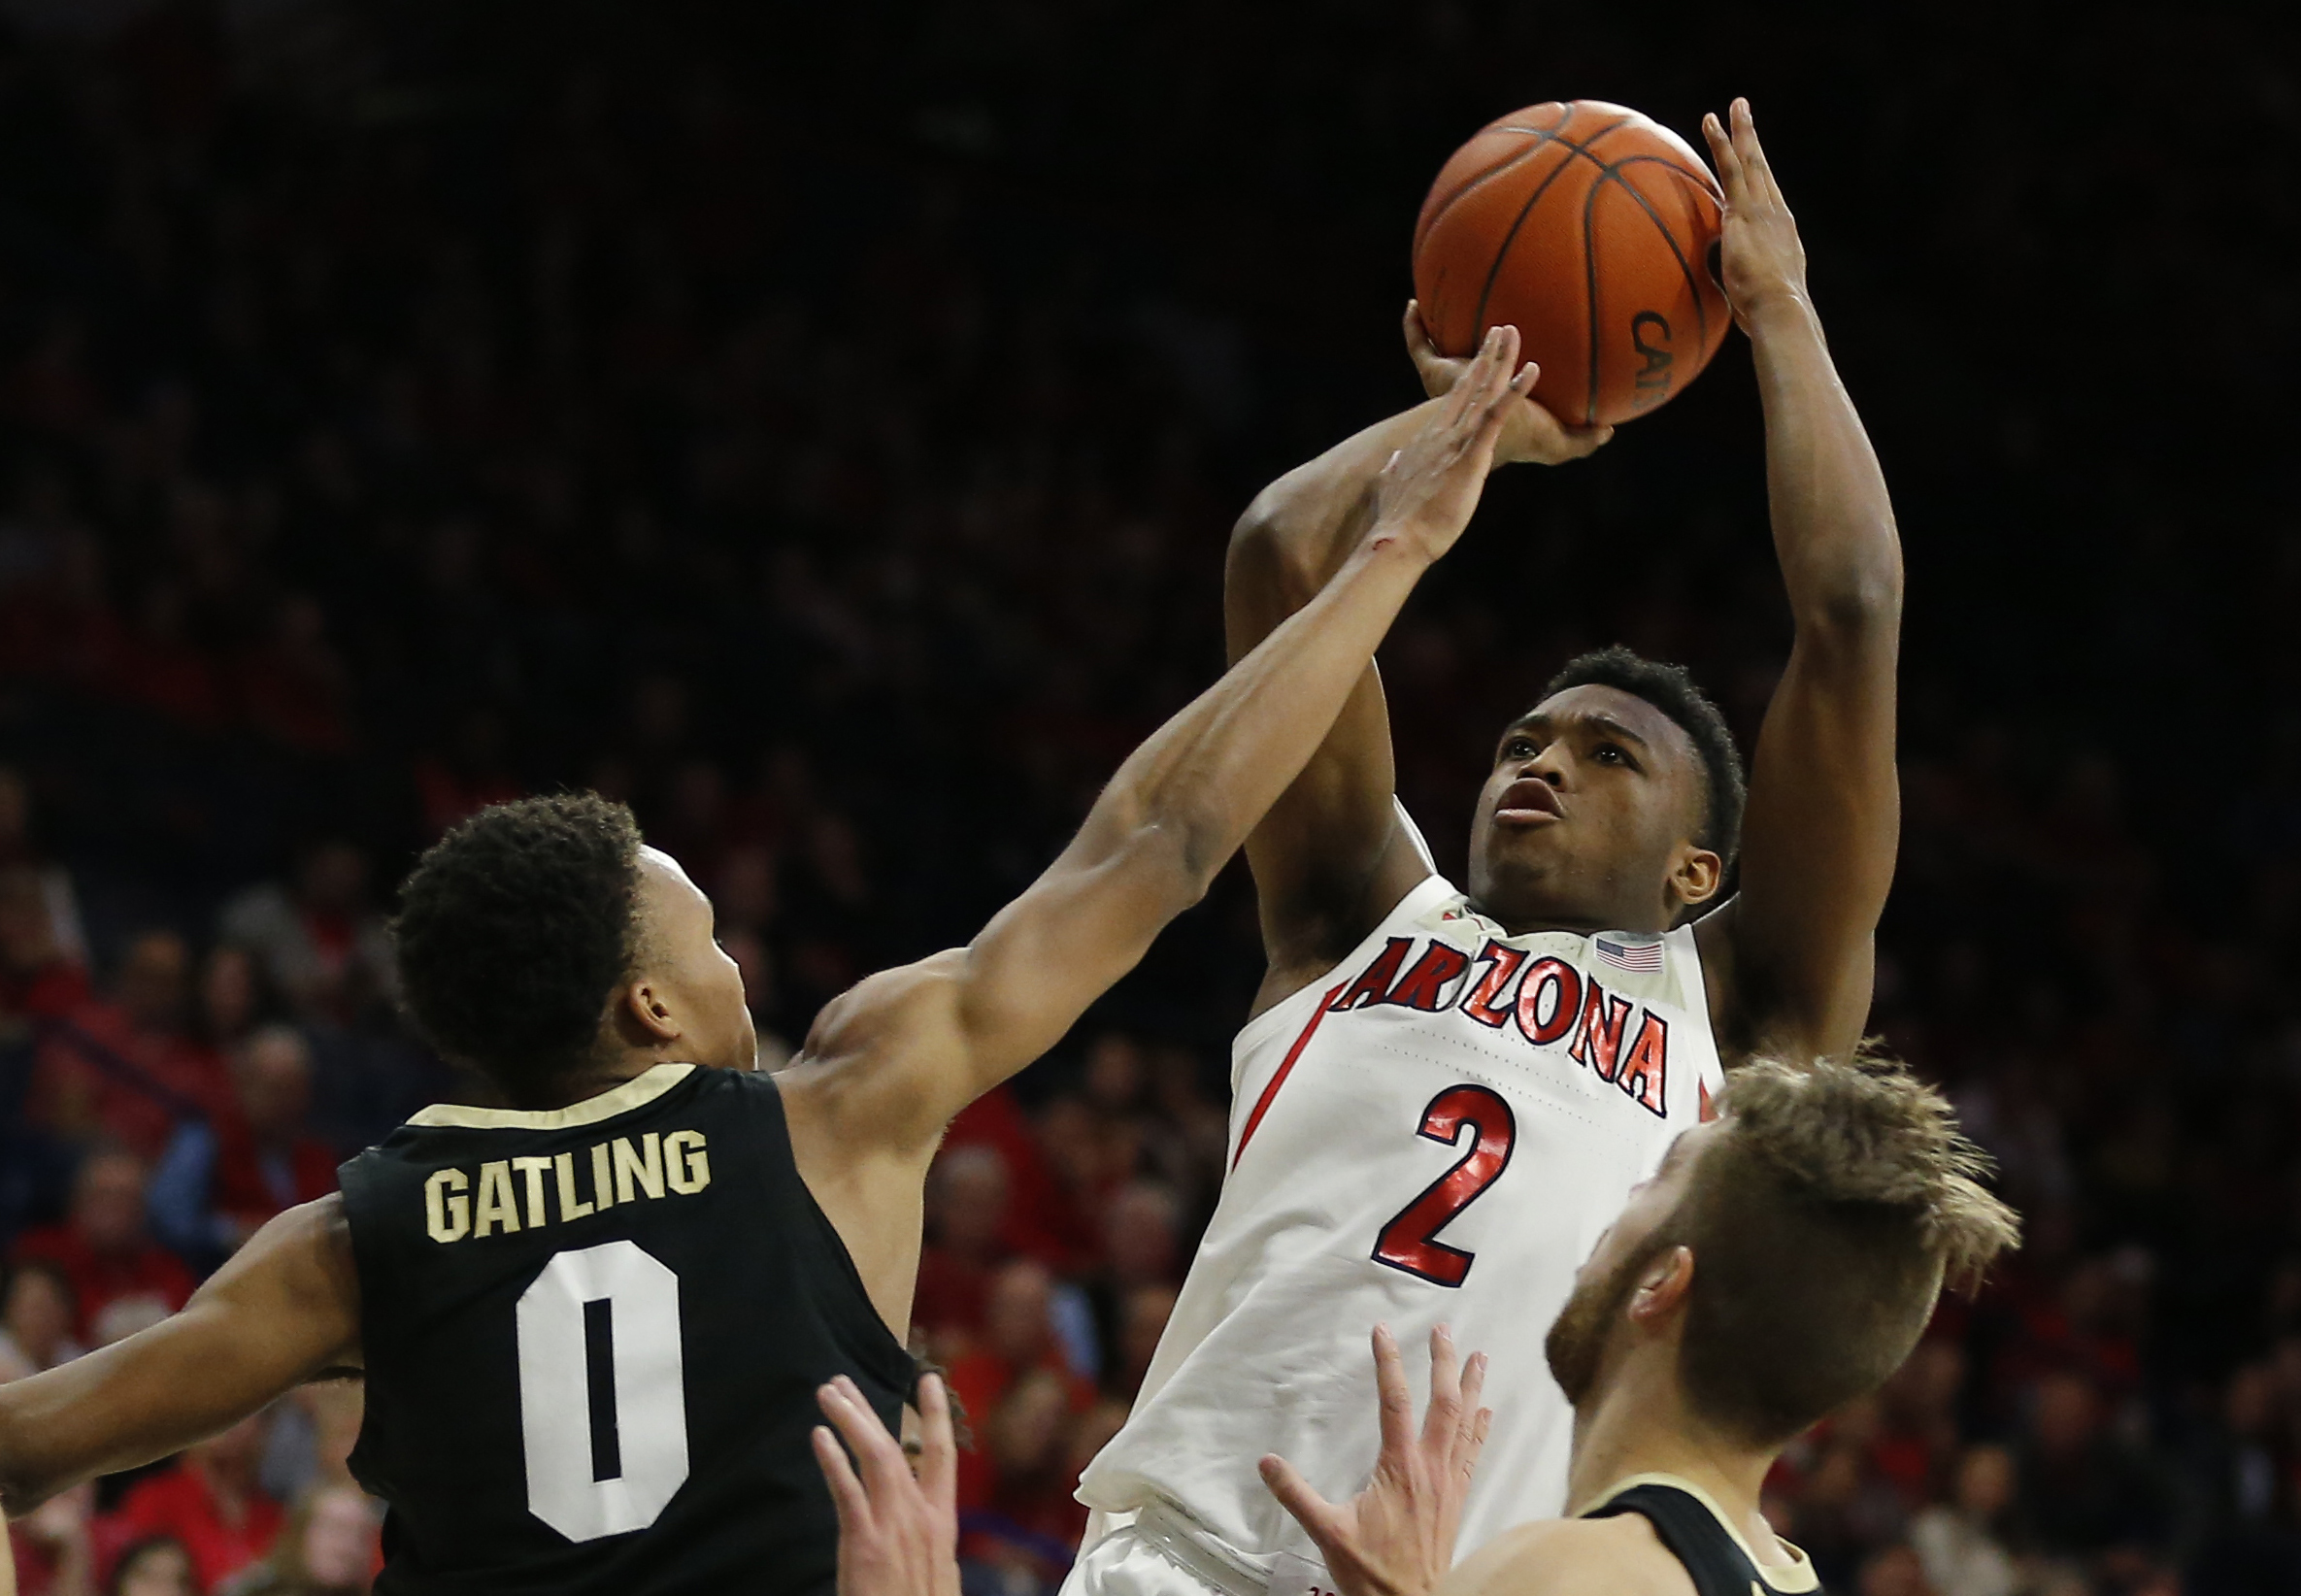 Arizona opens Pac-12 play with 64-56 win over Colorado